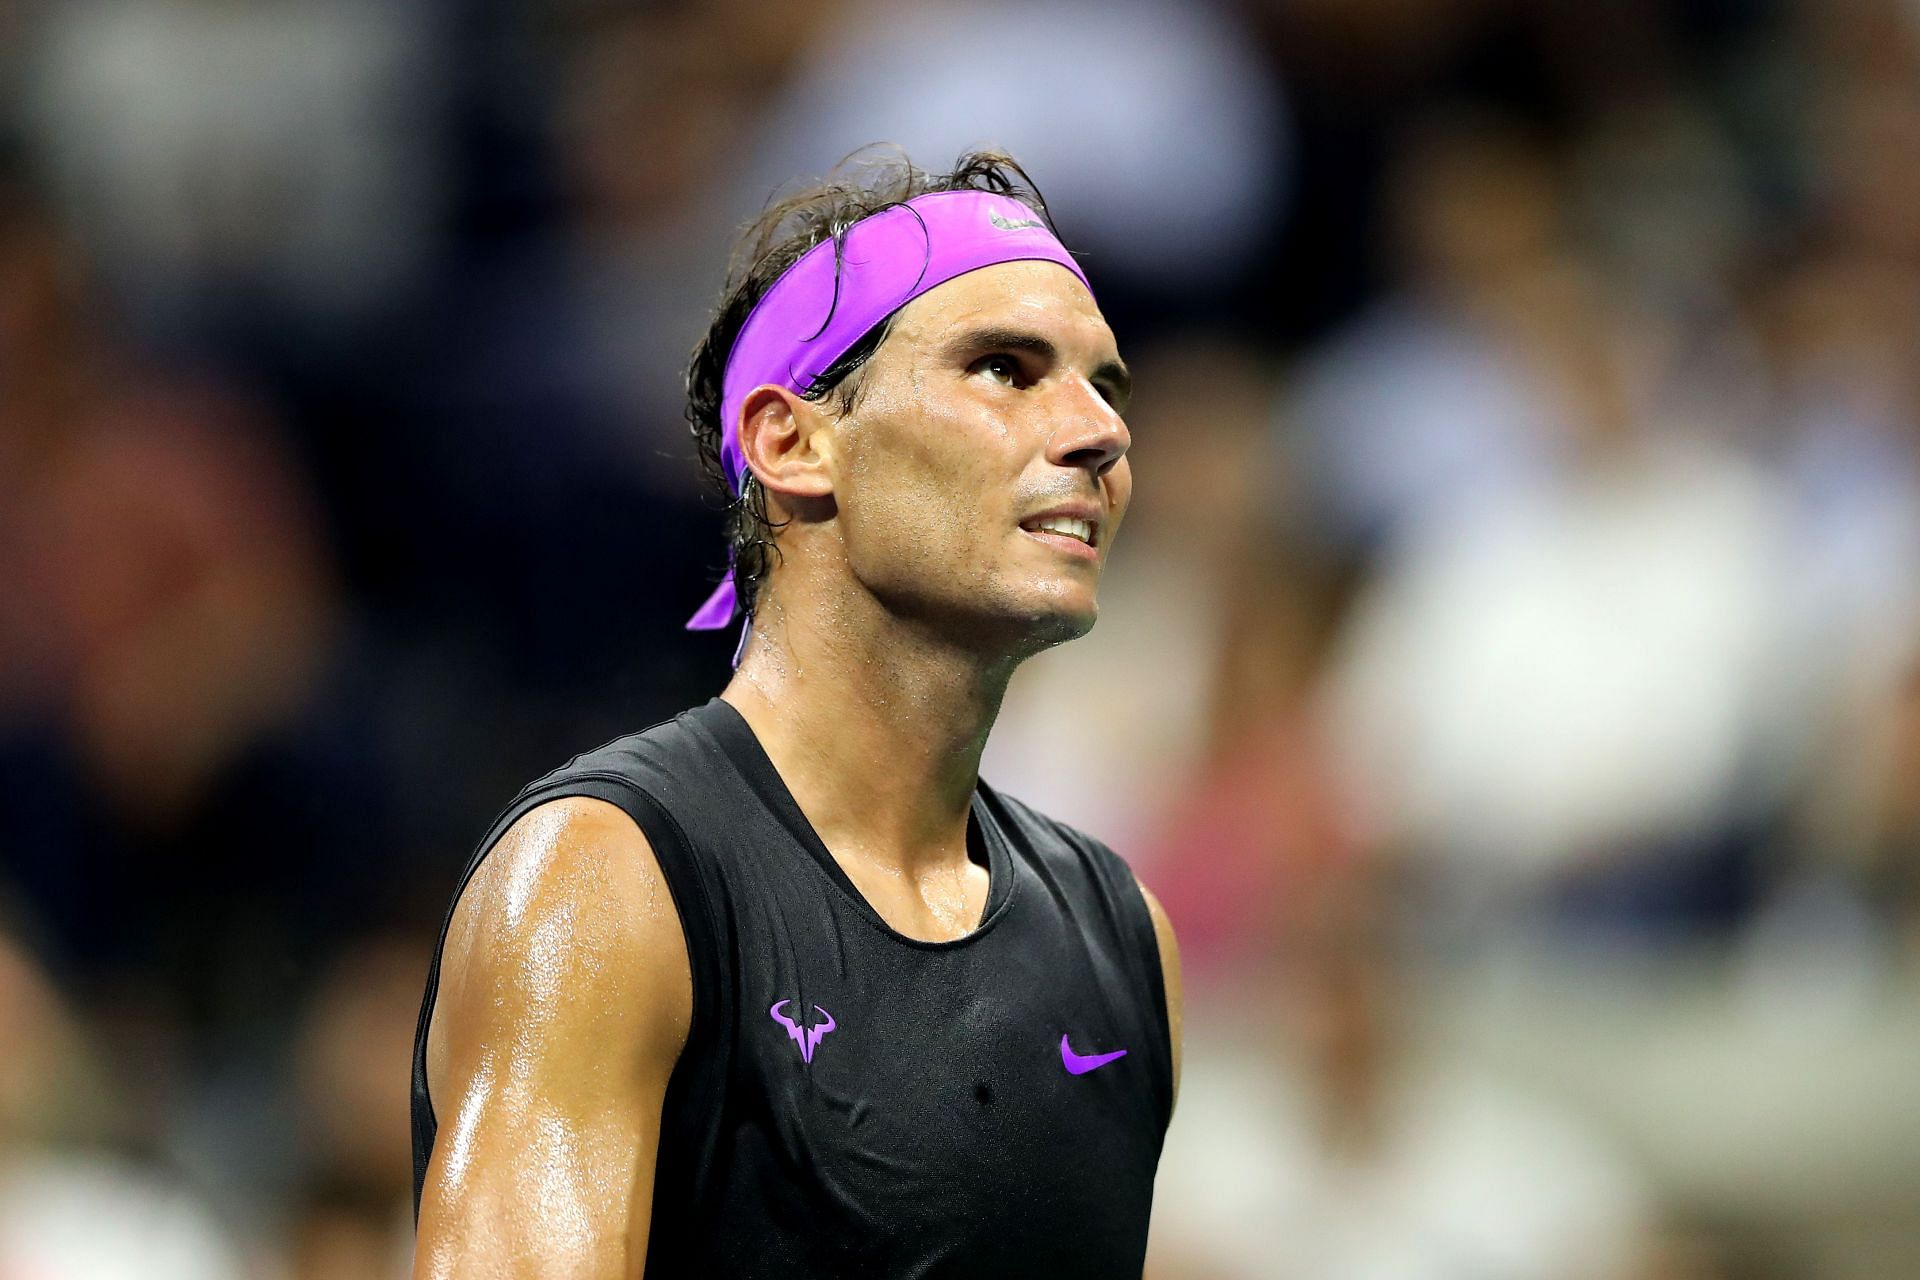 Rafael Nadal in action at the 2019 US Open